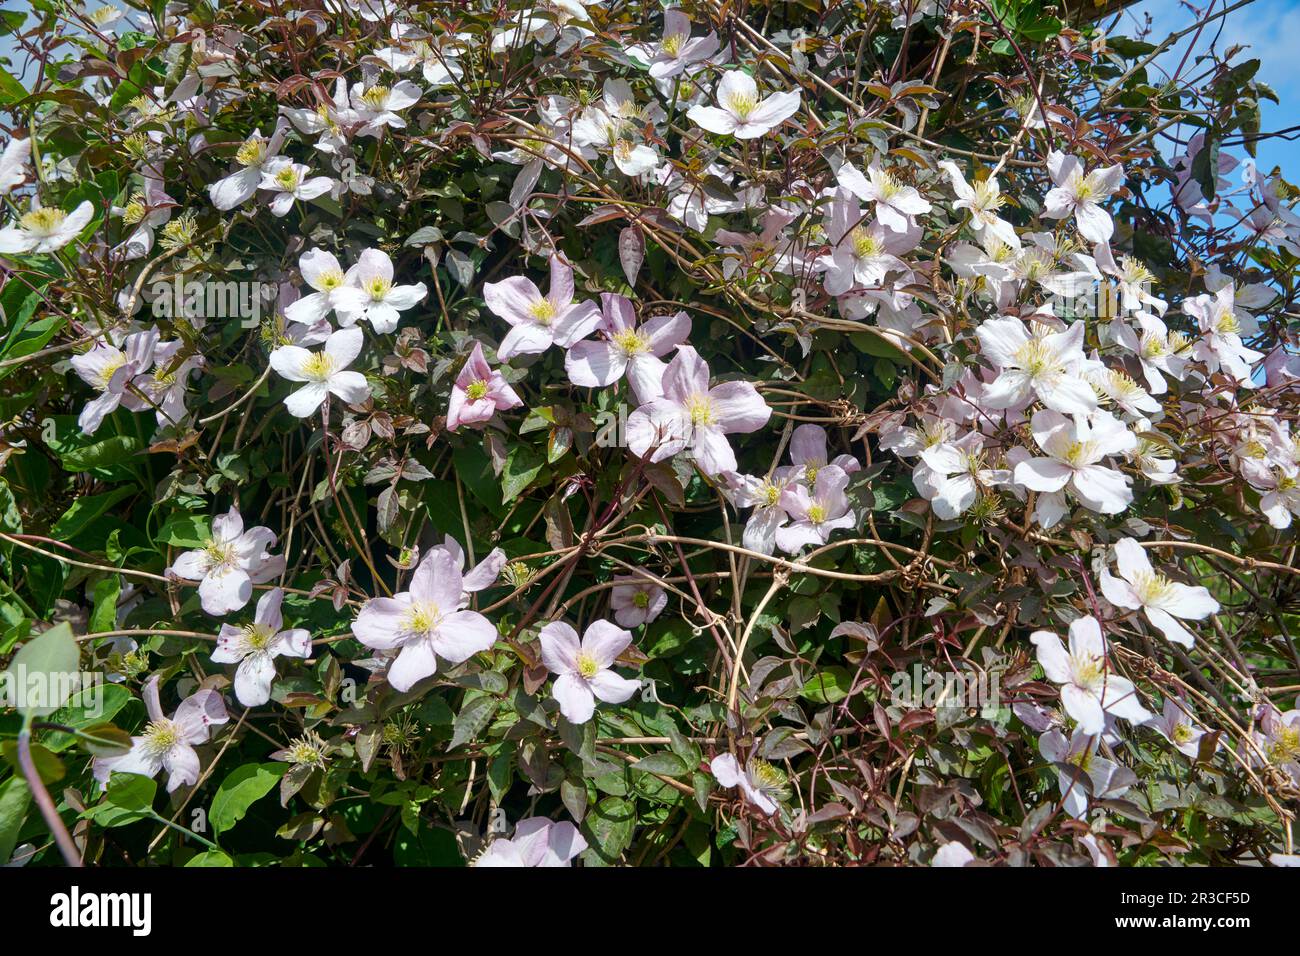 Clematis Montana or Himalayan Clematis flowering during the summer months growing in full sun. Stock Photo